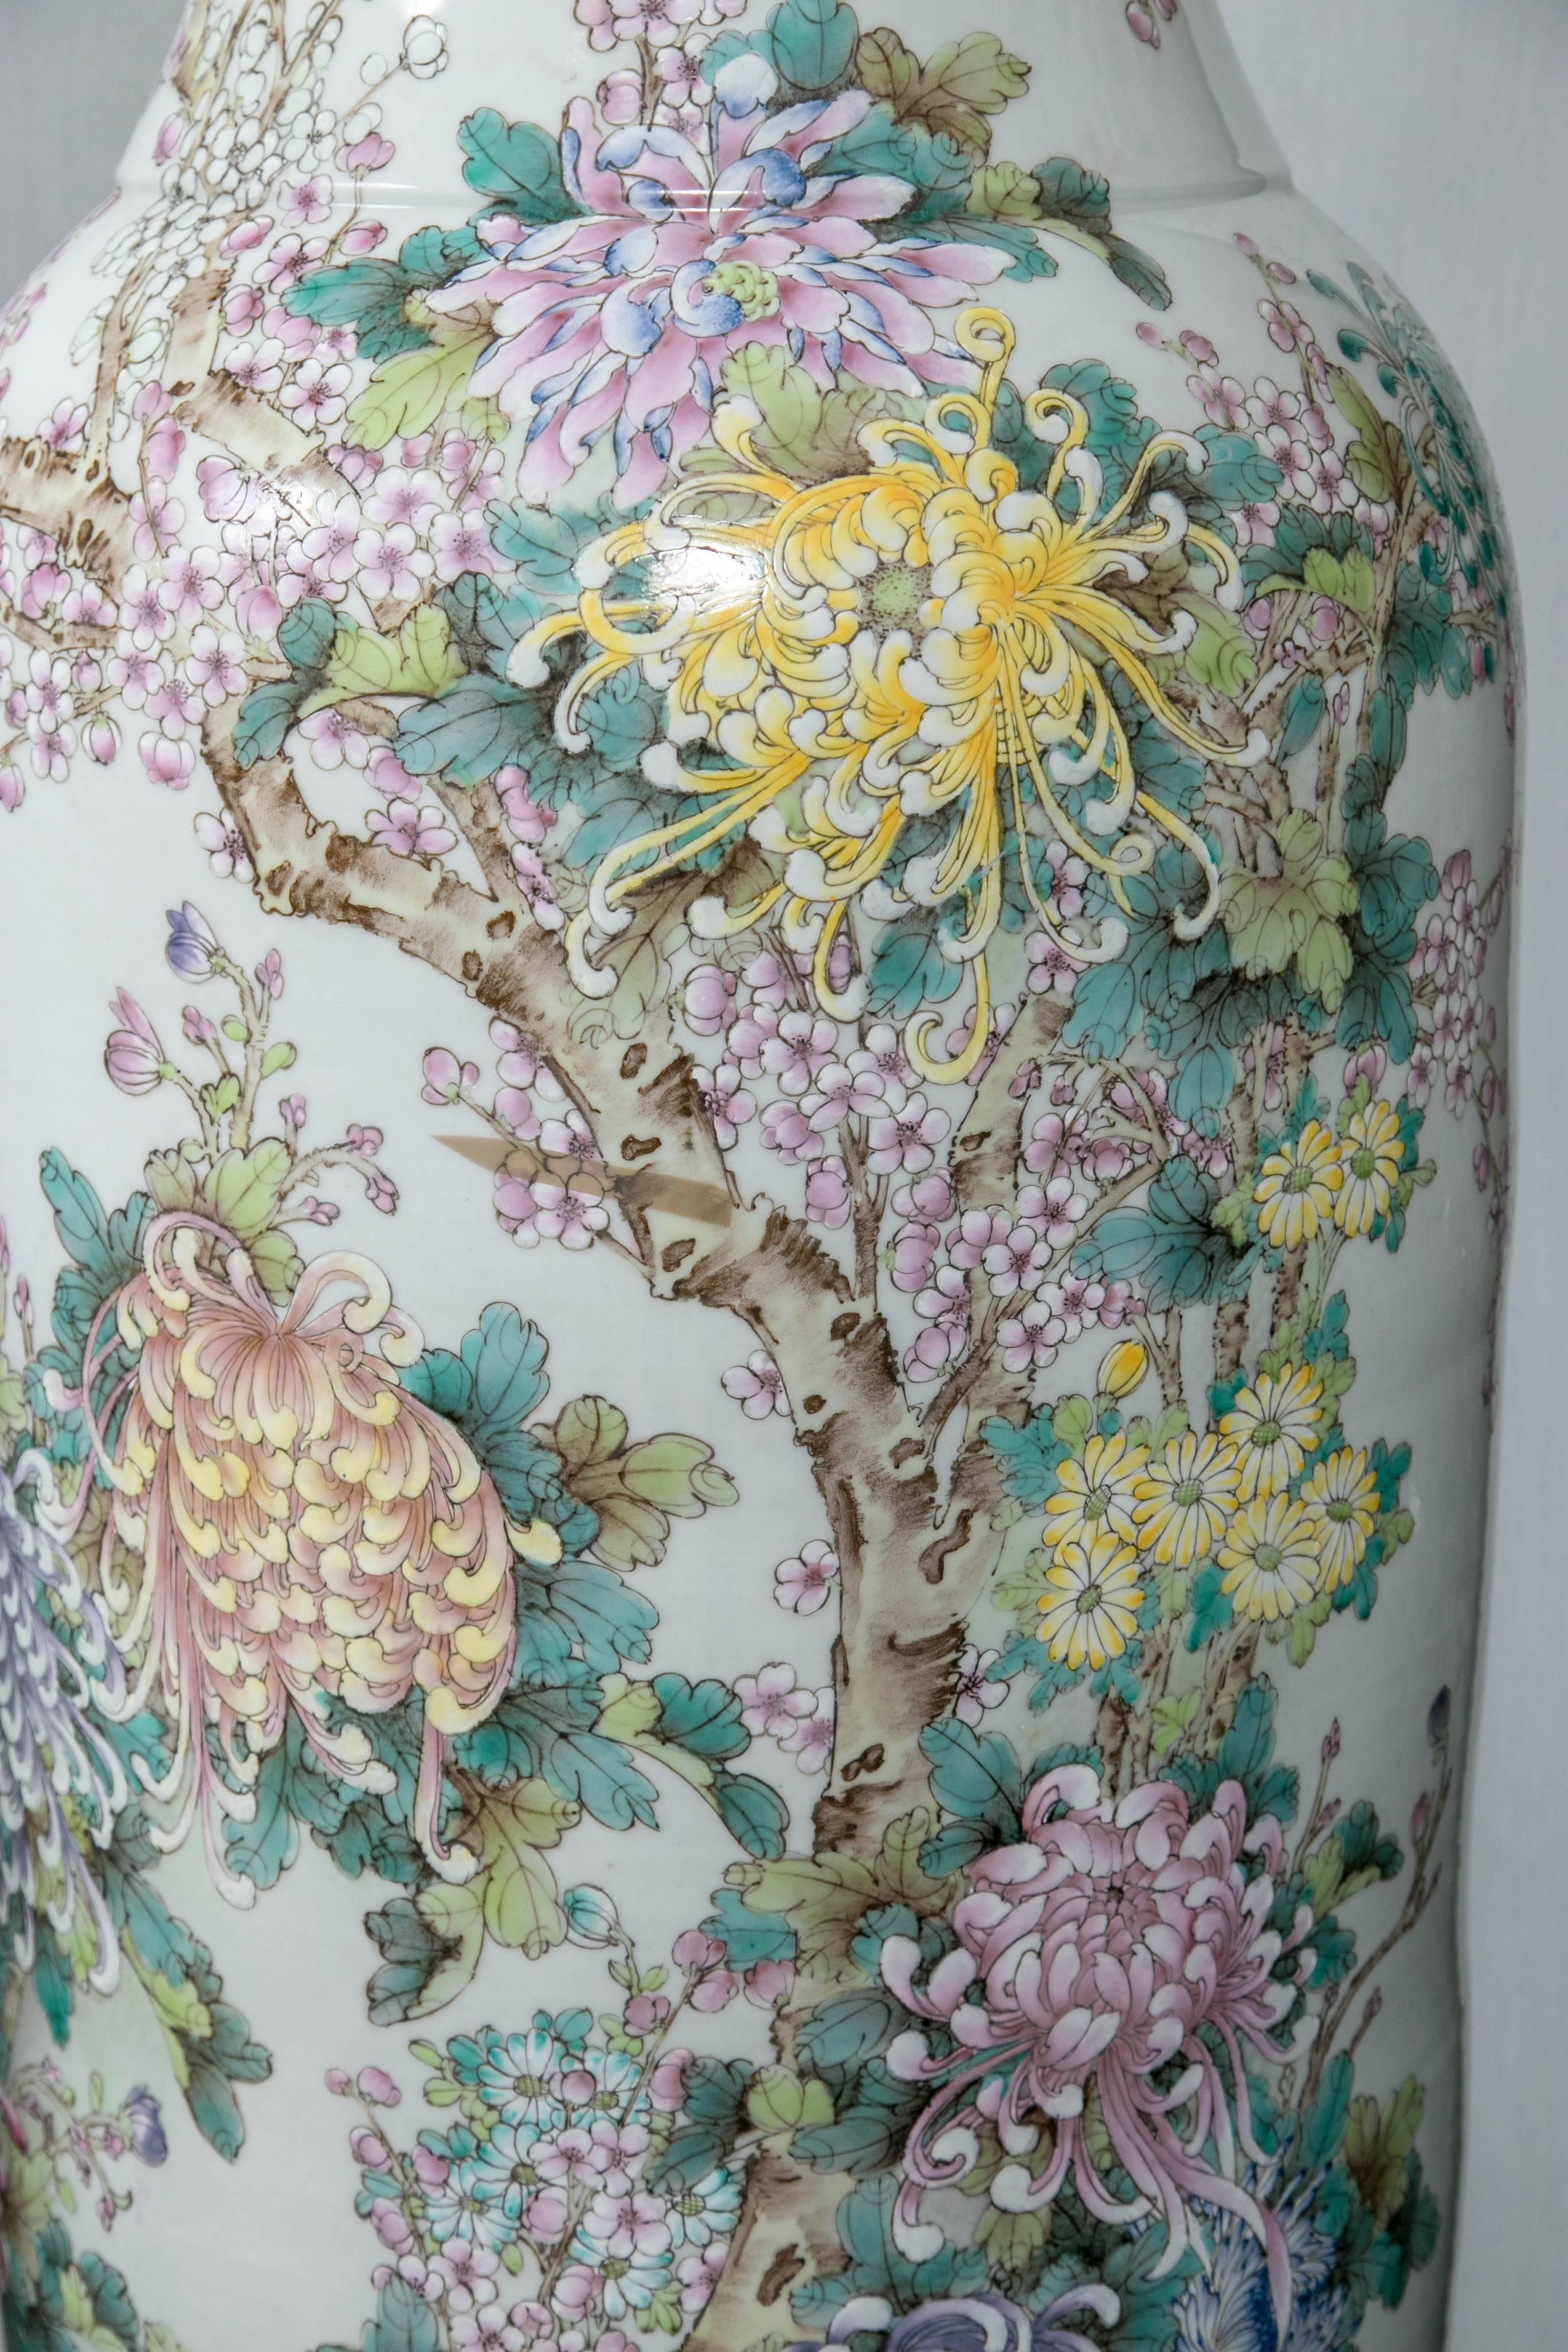 Each vase is hand-painted with prunus blossoms, mums, leaves, branches, etc. on a white porcelain ground. The rim decorated in gold.
They are 72 and 74 inches tall and approximately 20 inches in diameter.

